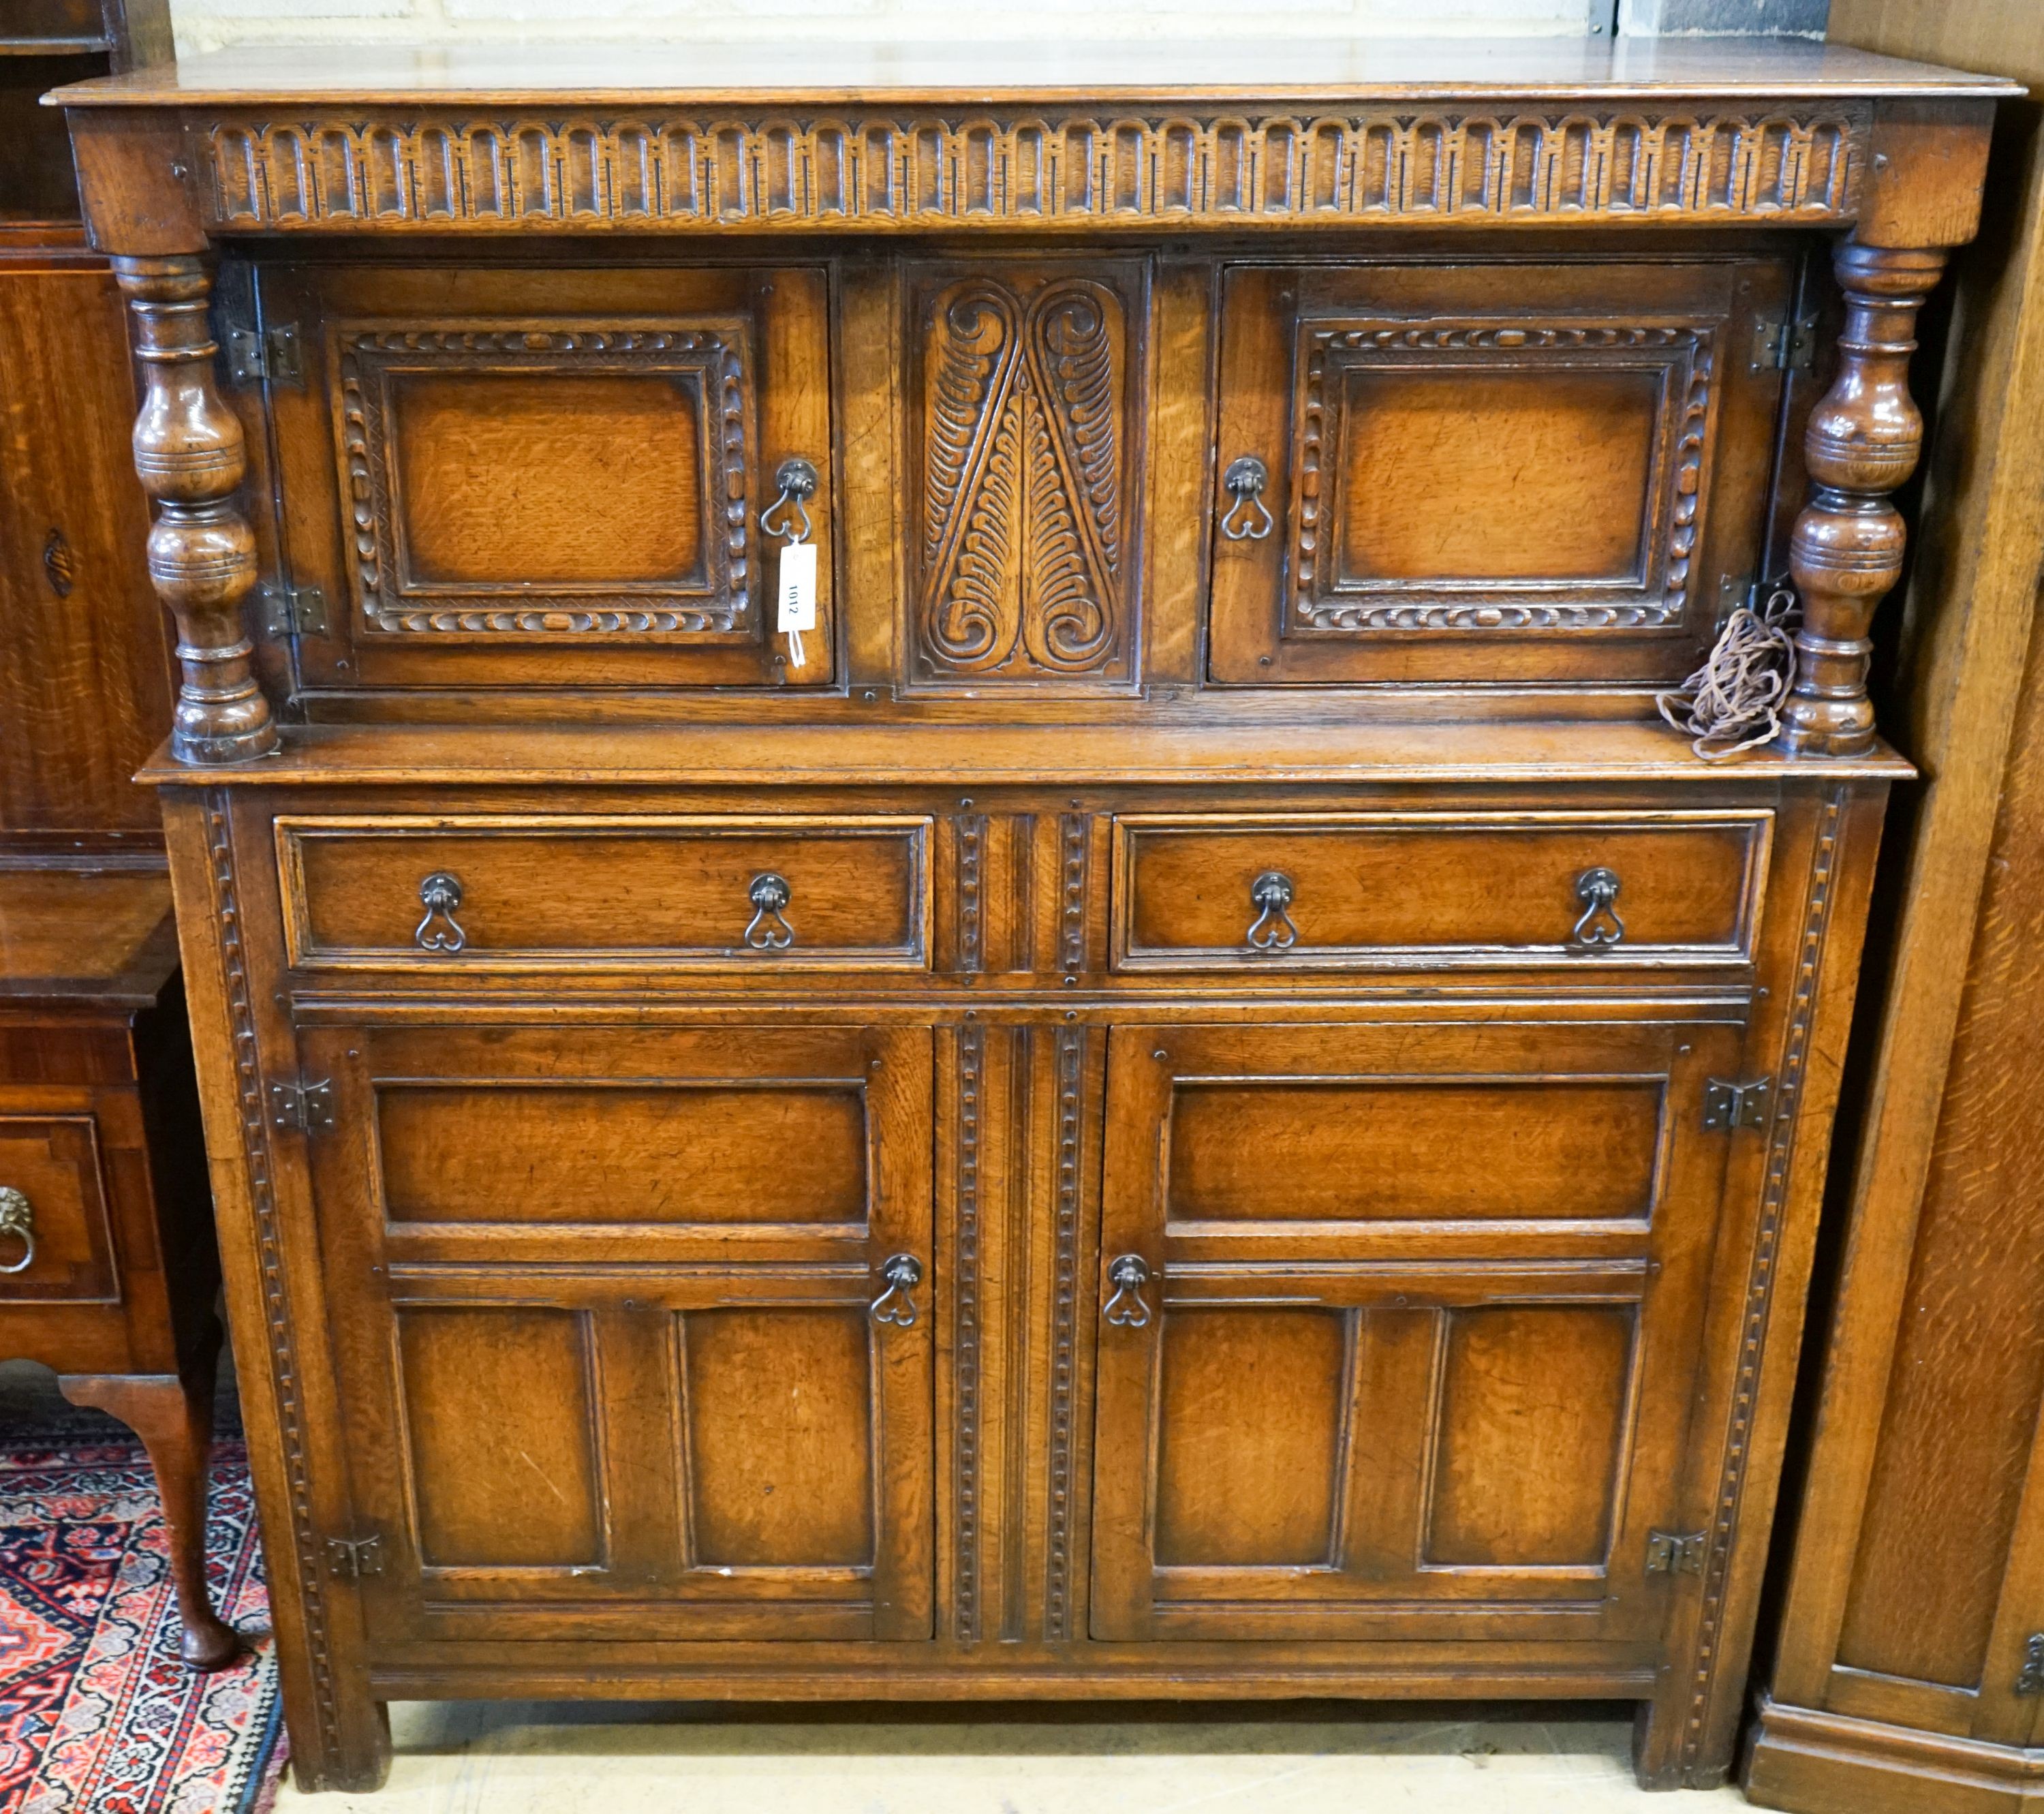 A 17th century style carved and panelled oak court cupboard